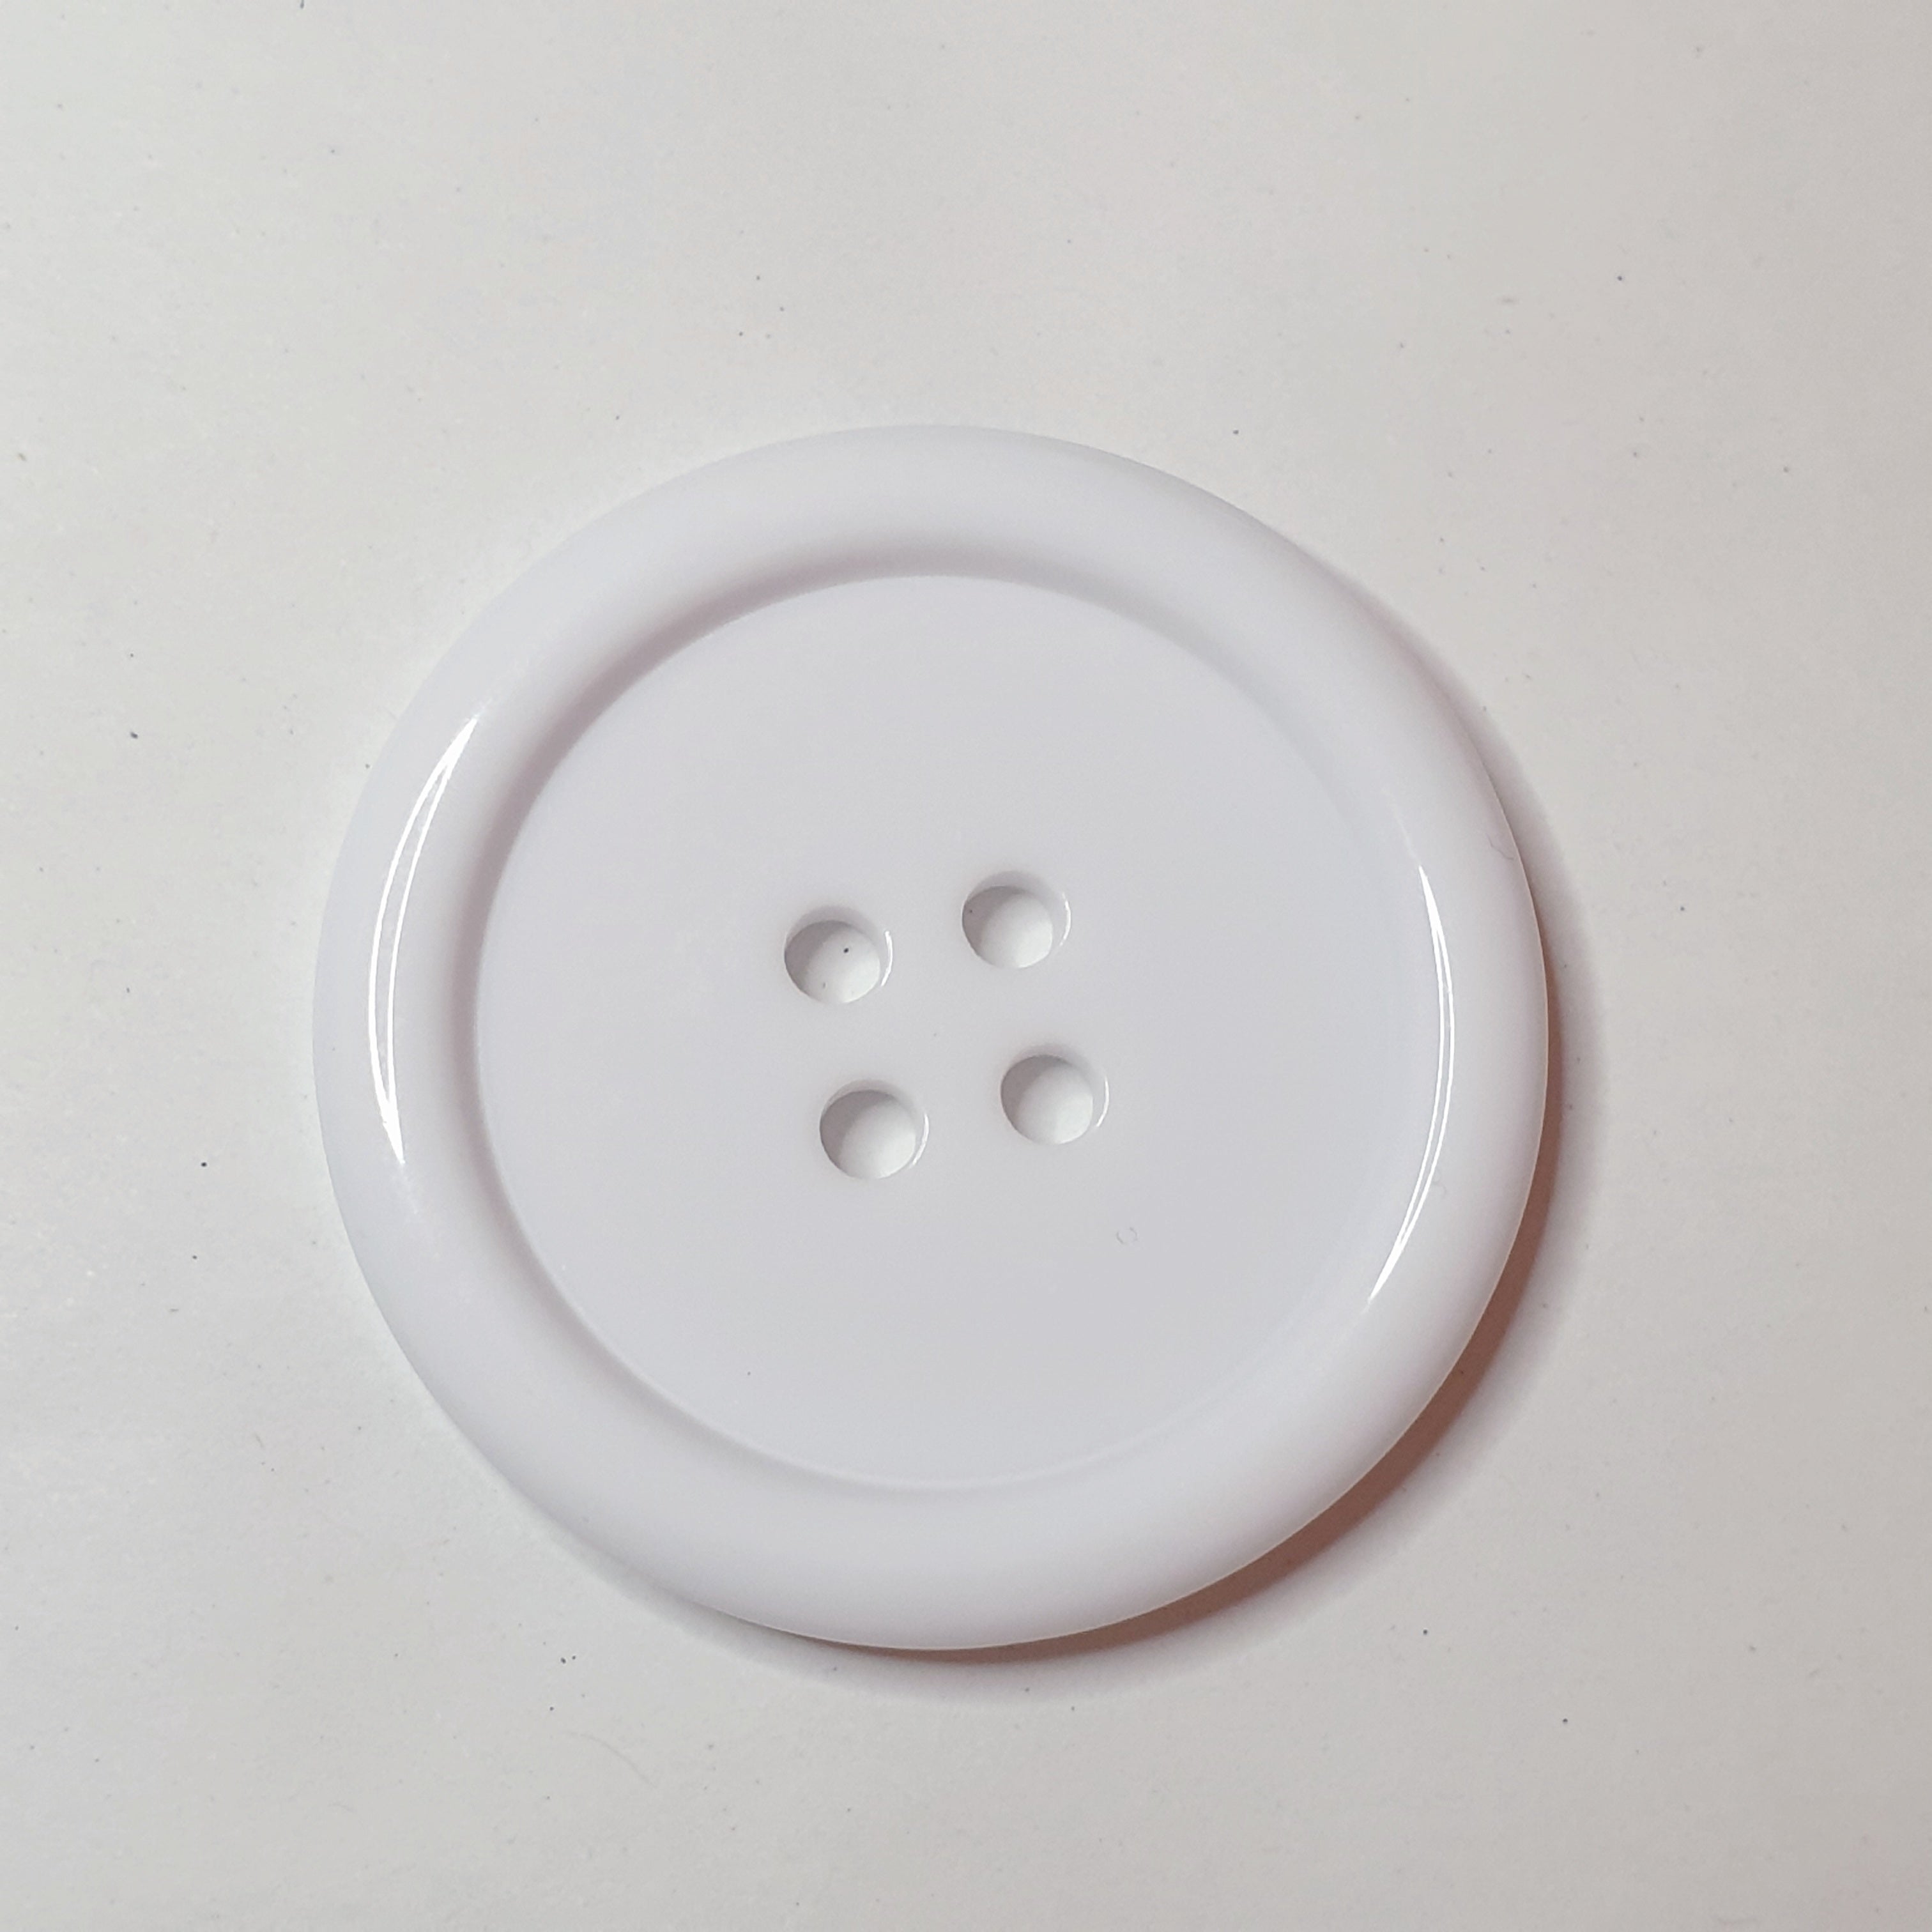 MajorCrafts 4pcs 50mm White 4 Holes Round Large Resin Sewing Buttons